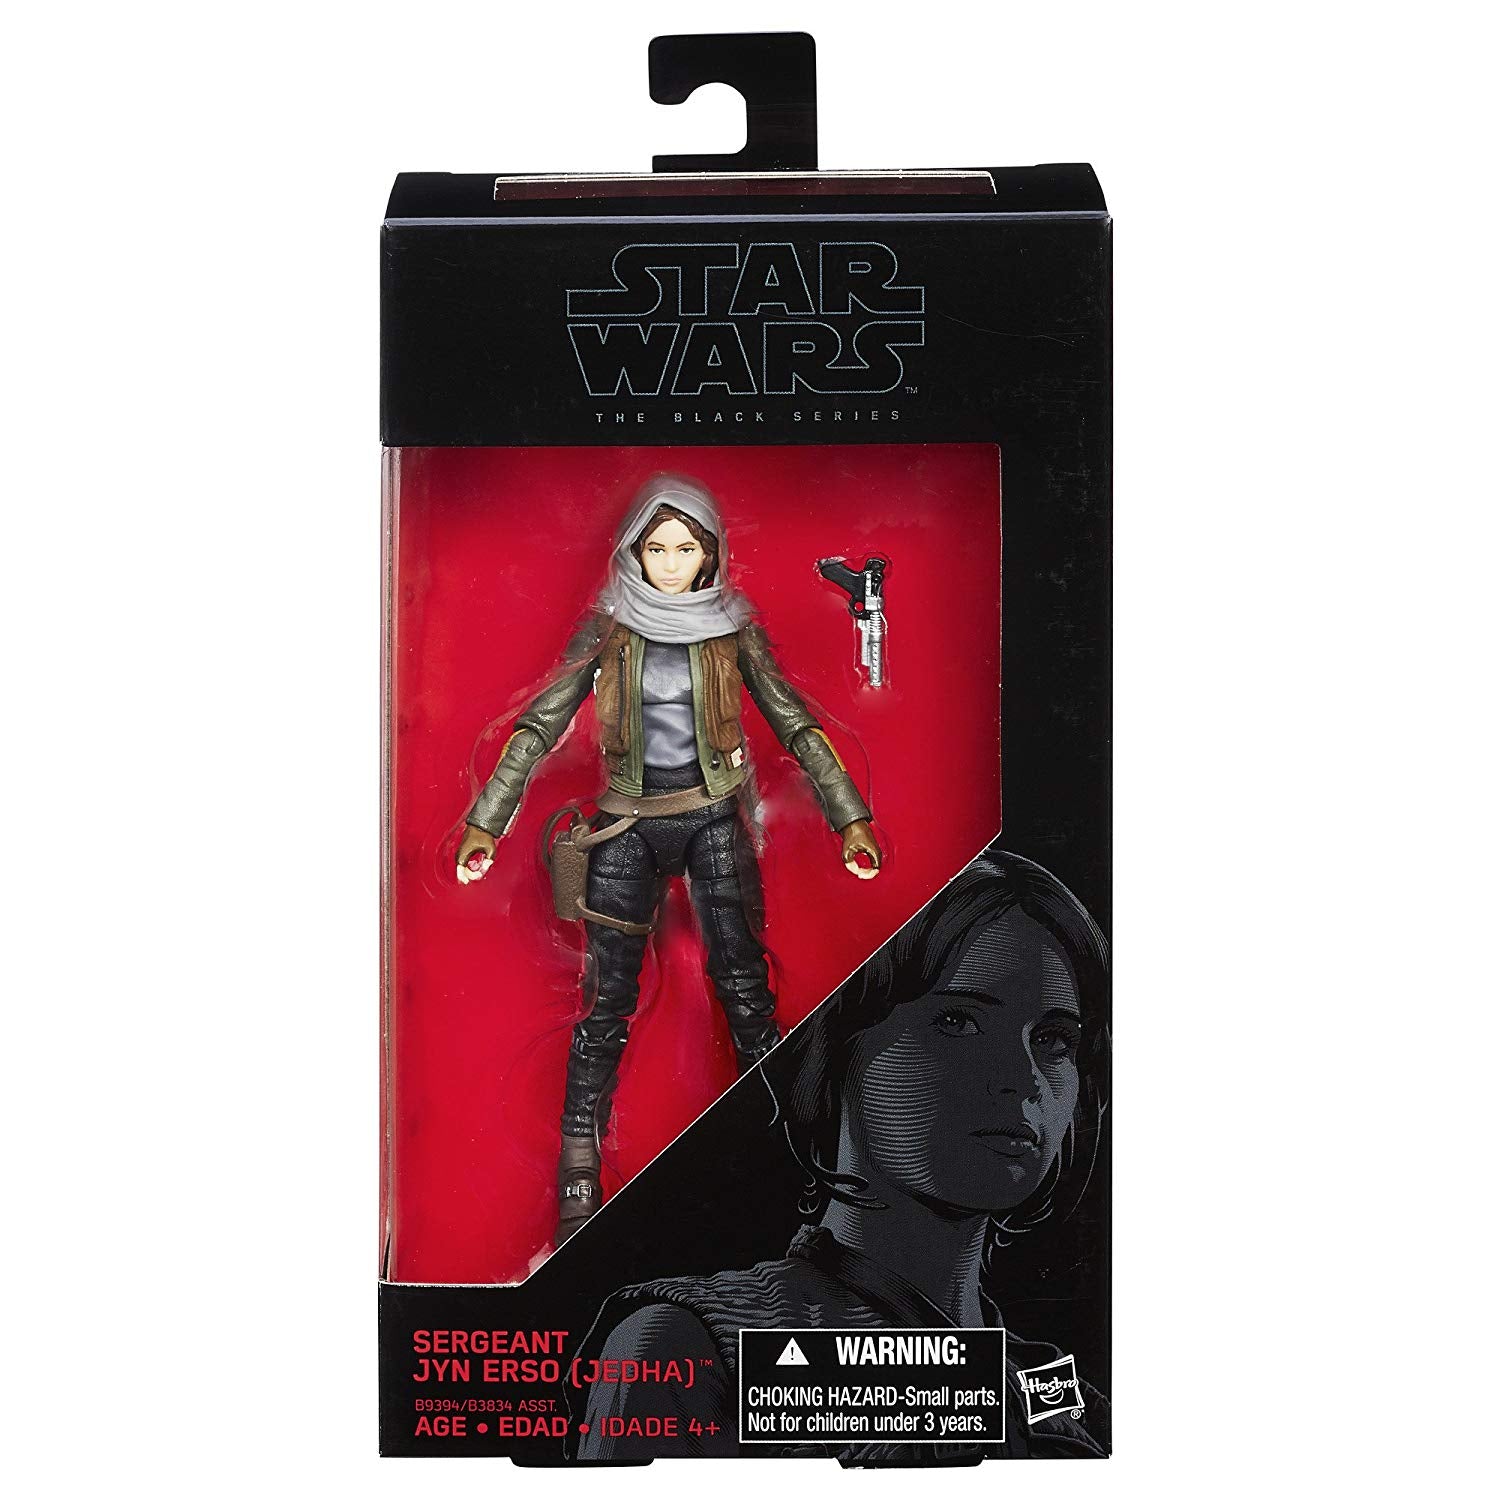 Hasbro Star Wars Black Series Force Awakens #22 Rogue One Sergeant Jyn Erso Jedha 6 Inch Action Figure